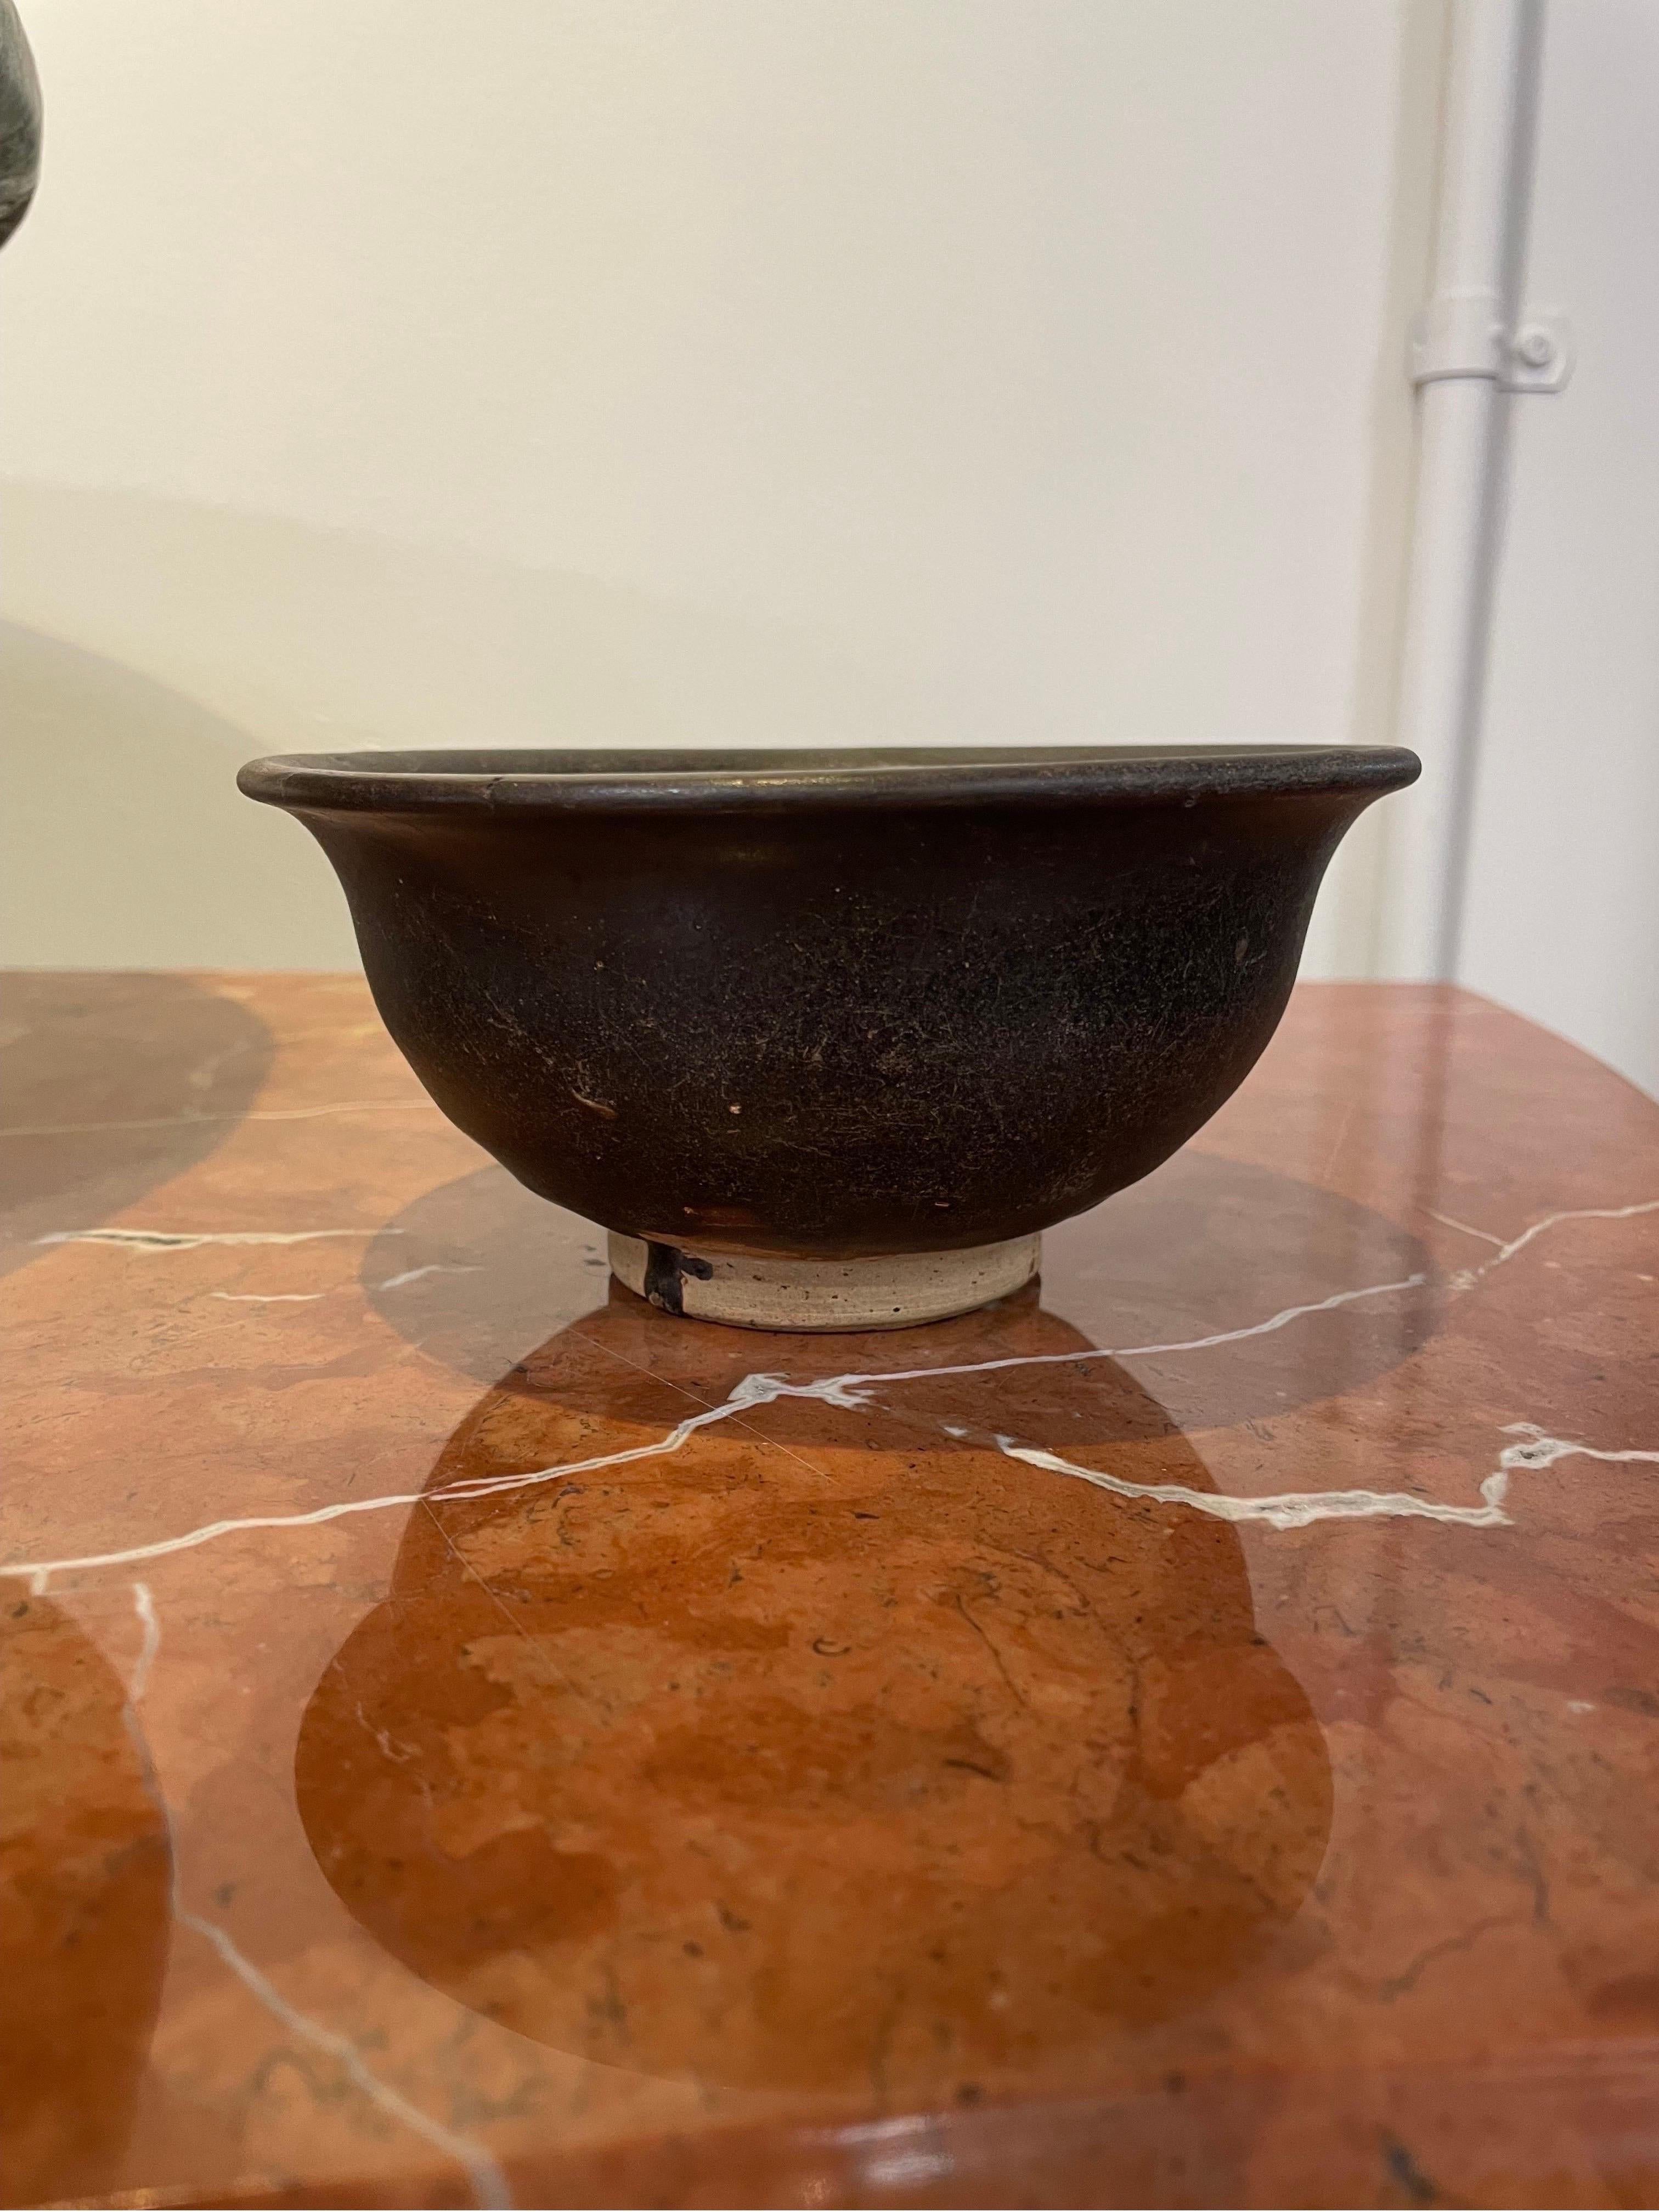 A Chinese Deep Brown Glazed Footed Bowl, 15th Century

Provenance: The Collection of Dr. John Yu AC

Dimension: Height: 7.3 cm. Dimension: 15.5 cm

Dr. Yu was the Founding Chair of VisAsia in the Art Gallery of New South Wales and is a Life Governor